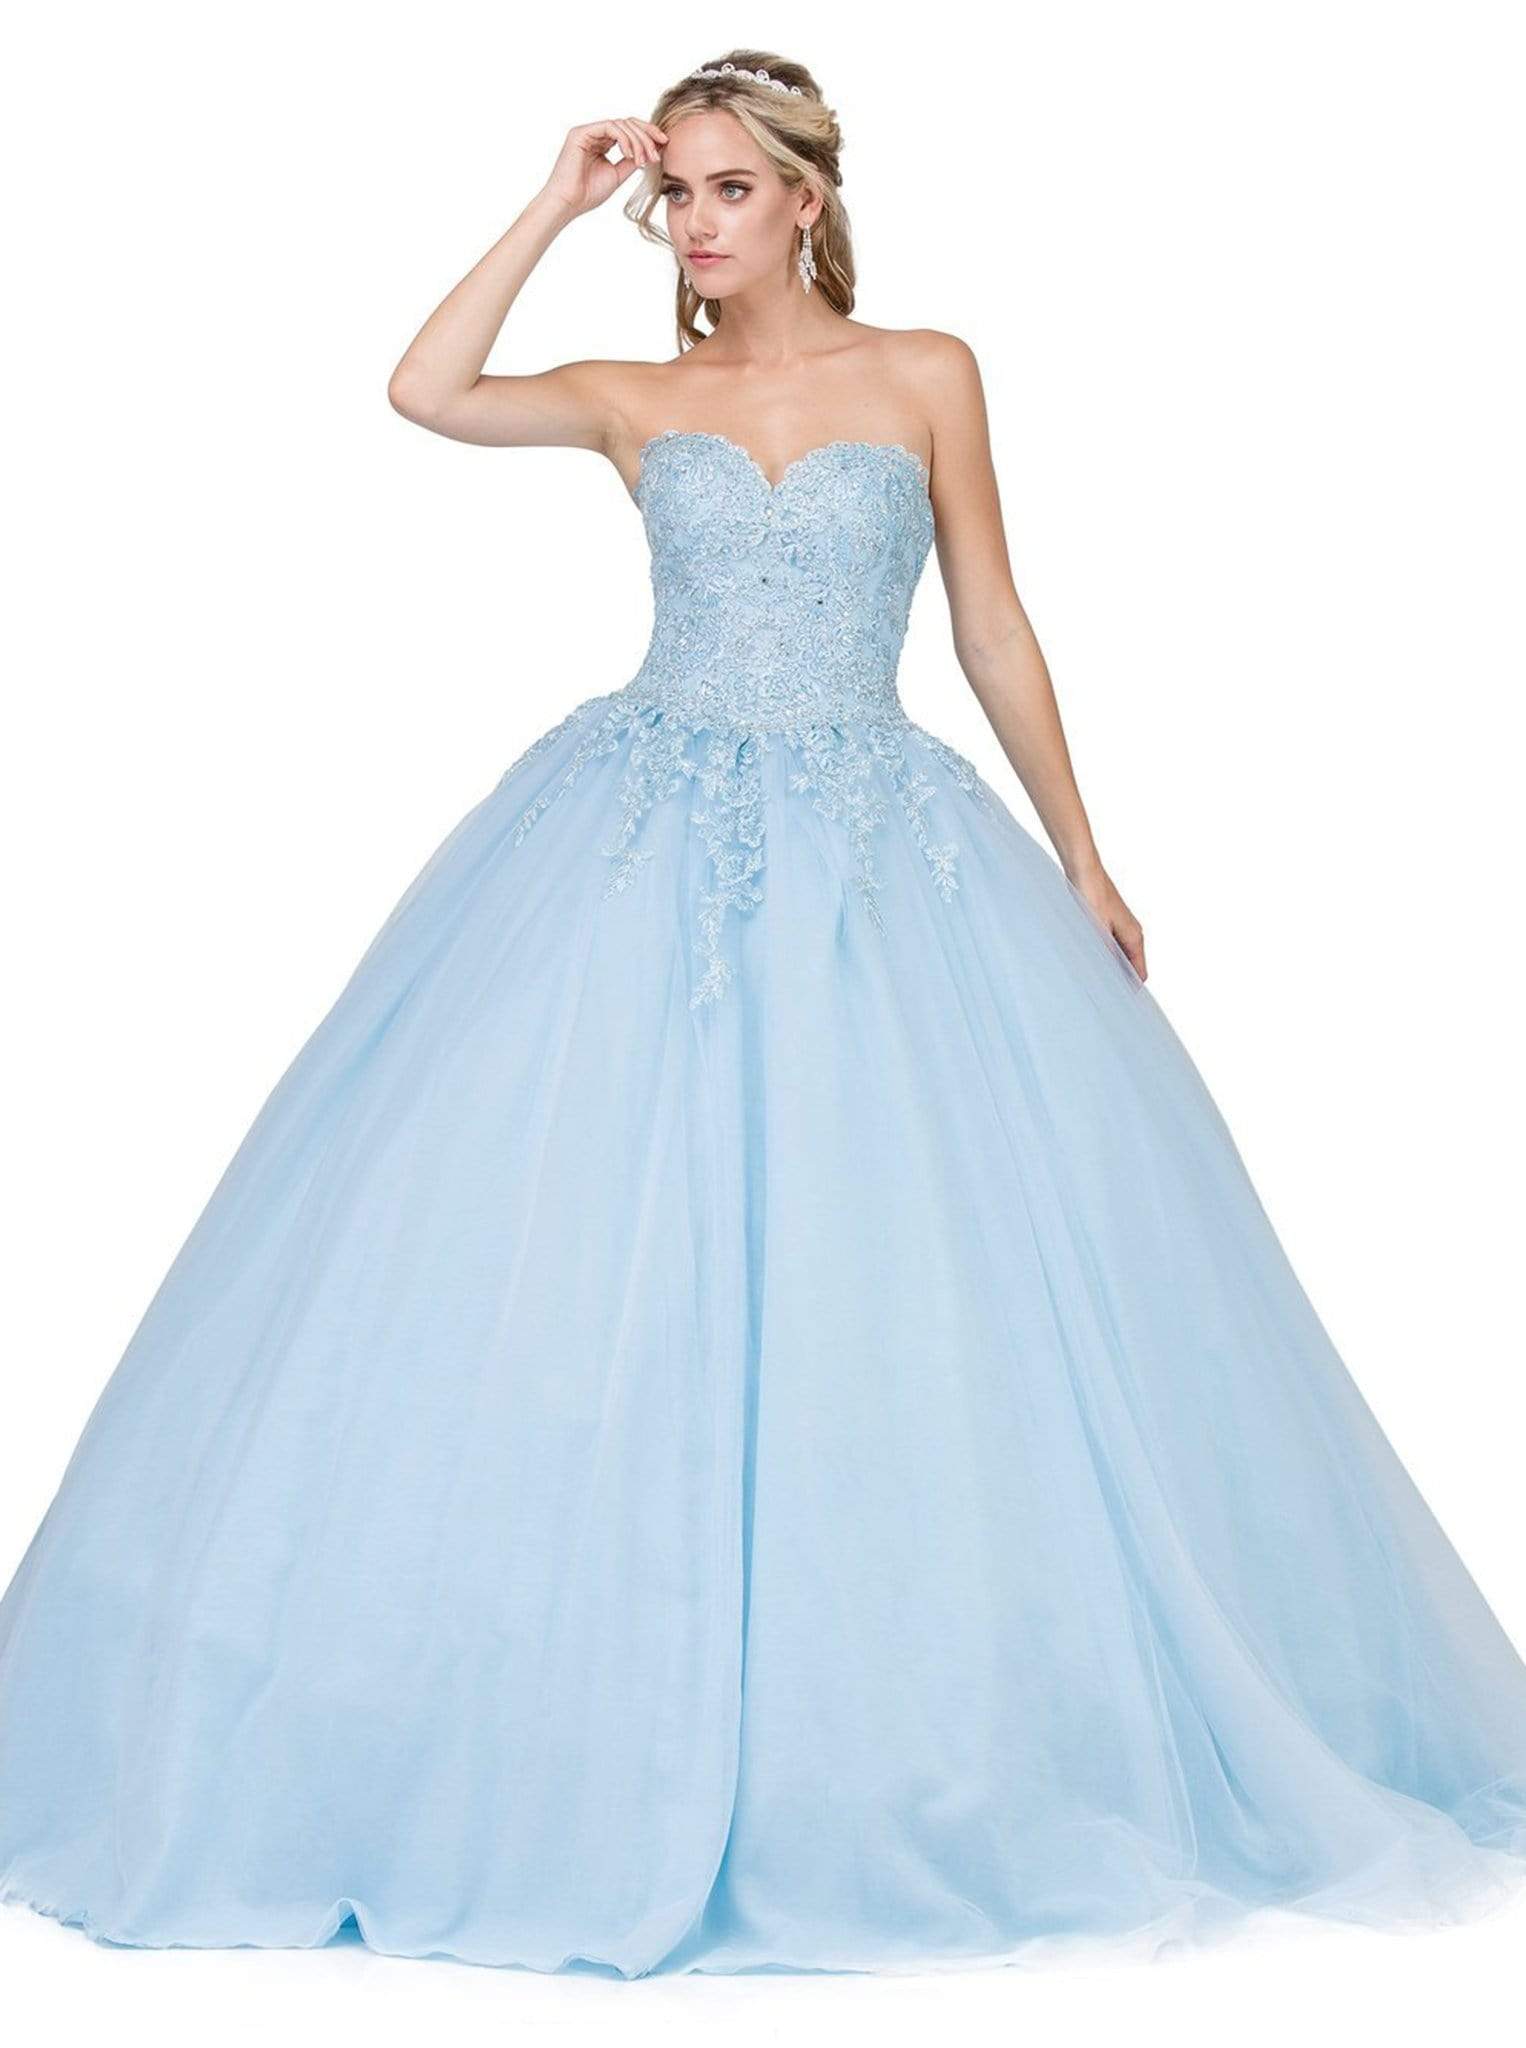 Dancing Queen - 1337 Lace Appliqued Sweetheart Bodice Ballgown ...